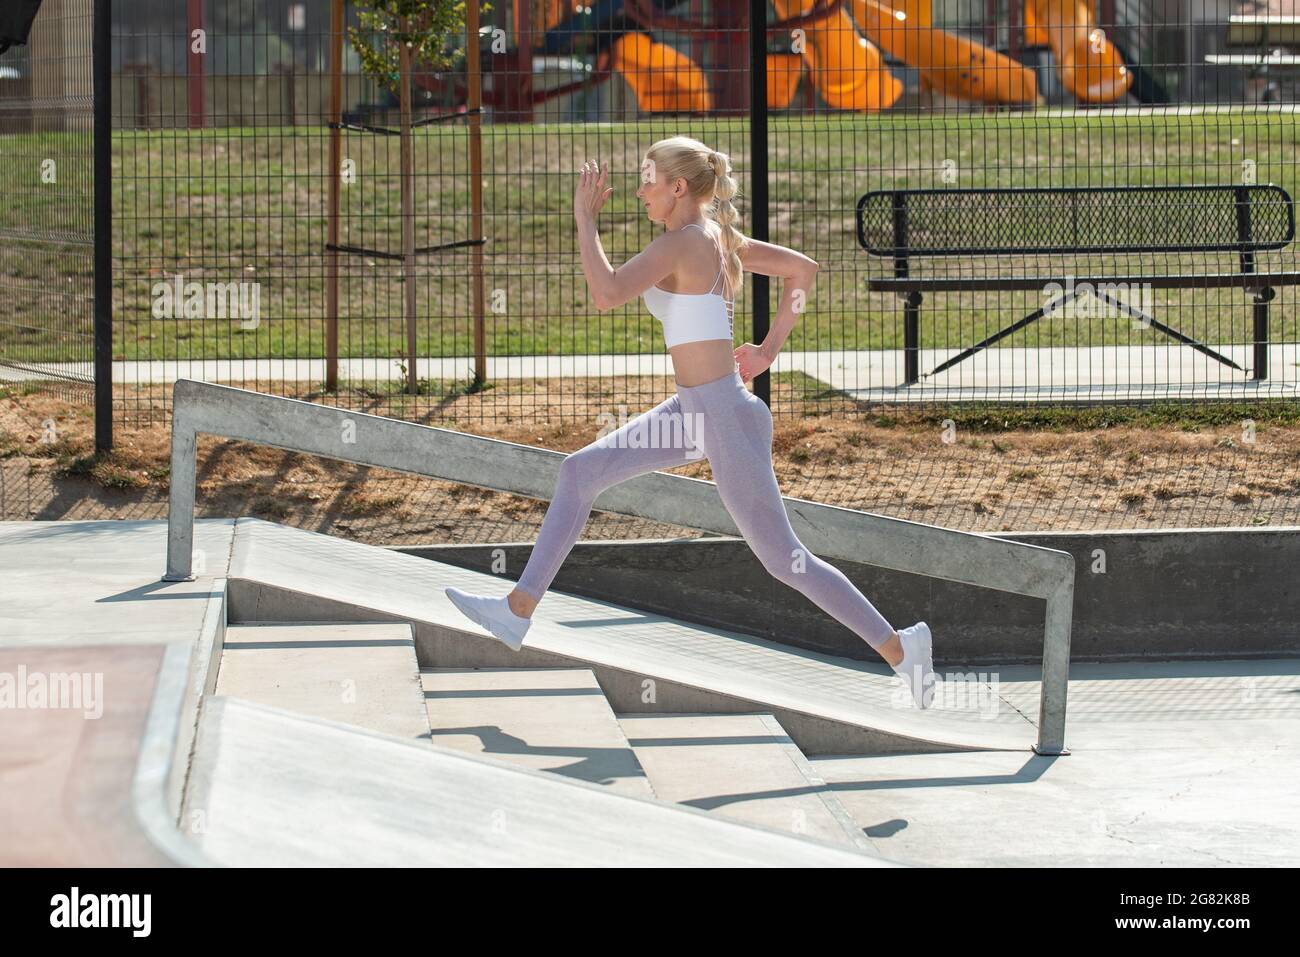 Healthy and fit atrractive blonde woman leaping up a short flight of concrete stairs at the park. Stock Photo